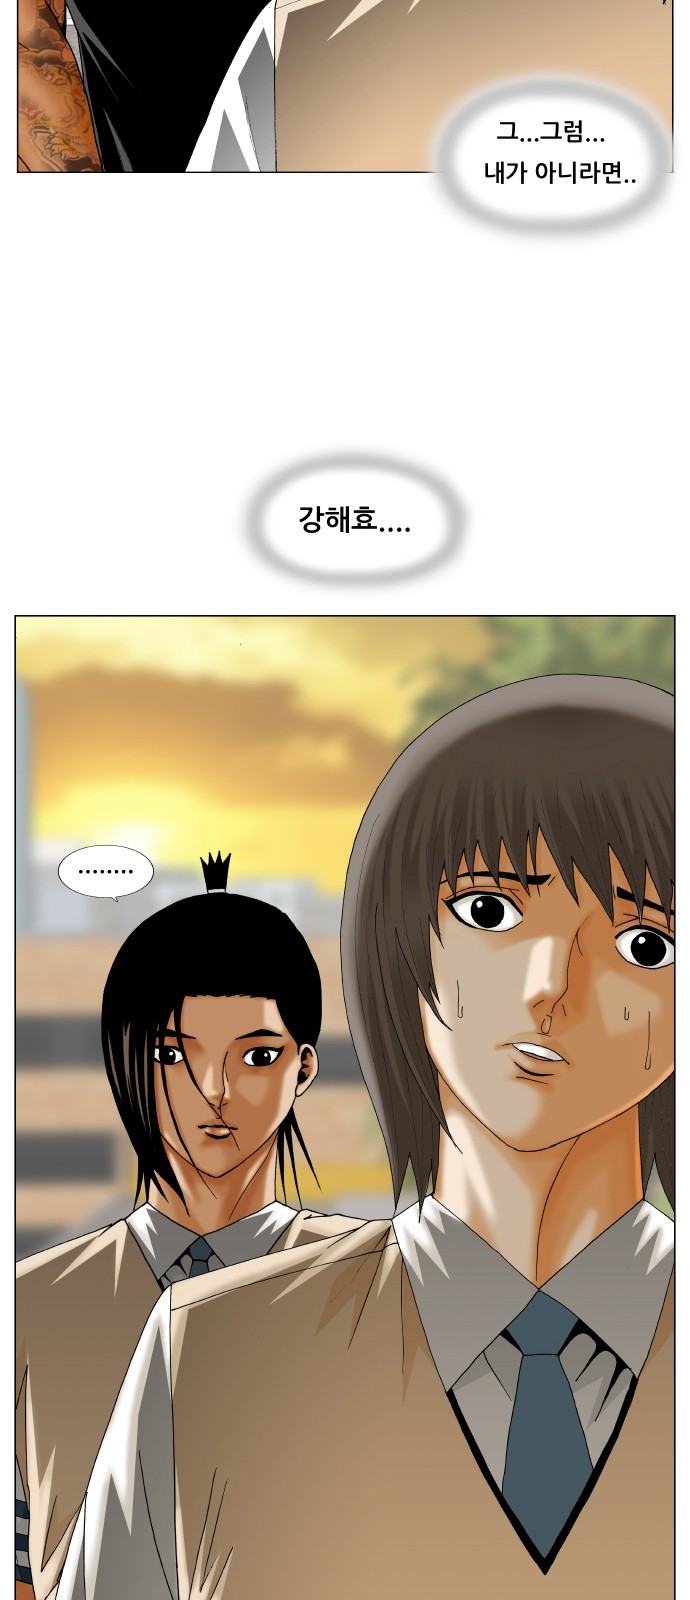 Ultimate Legend - Kang Hae Hyo - Chapter 274 - Page 2